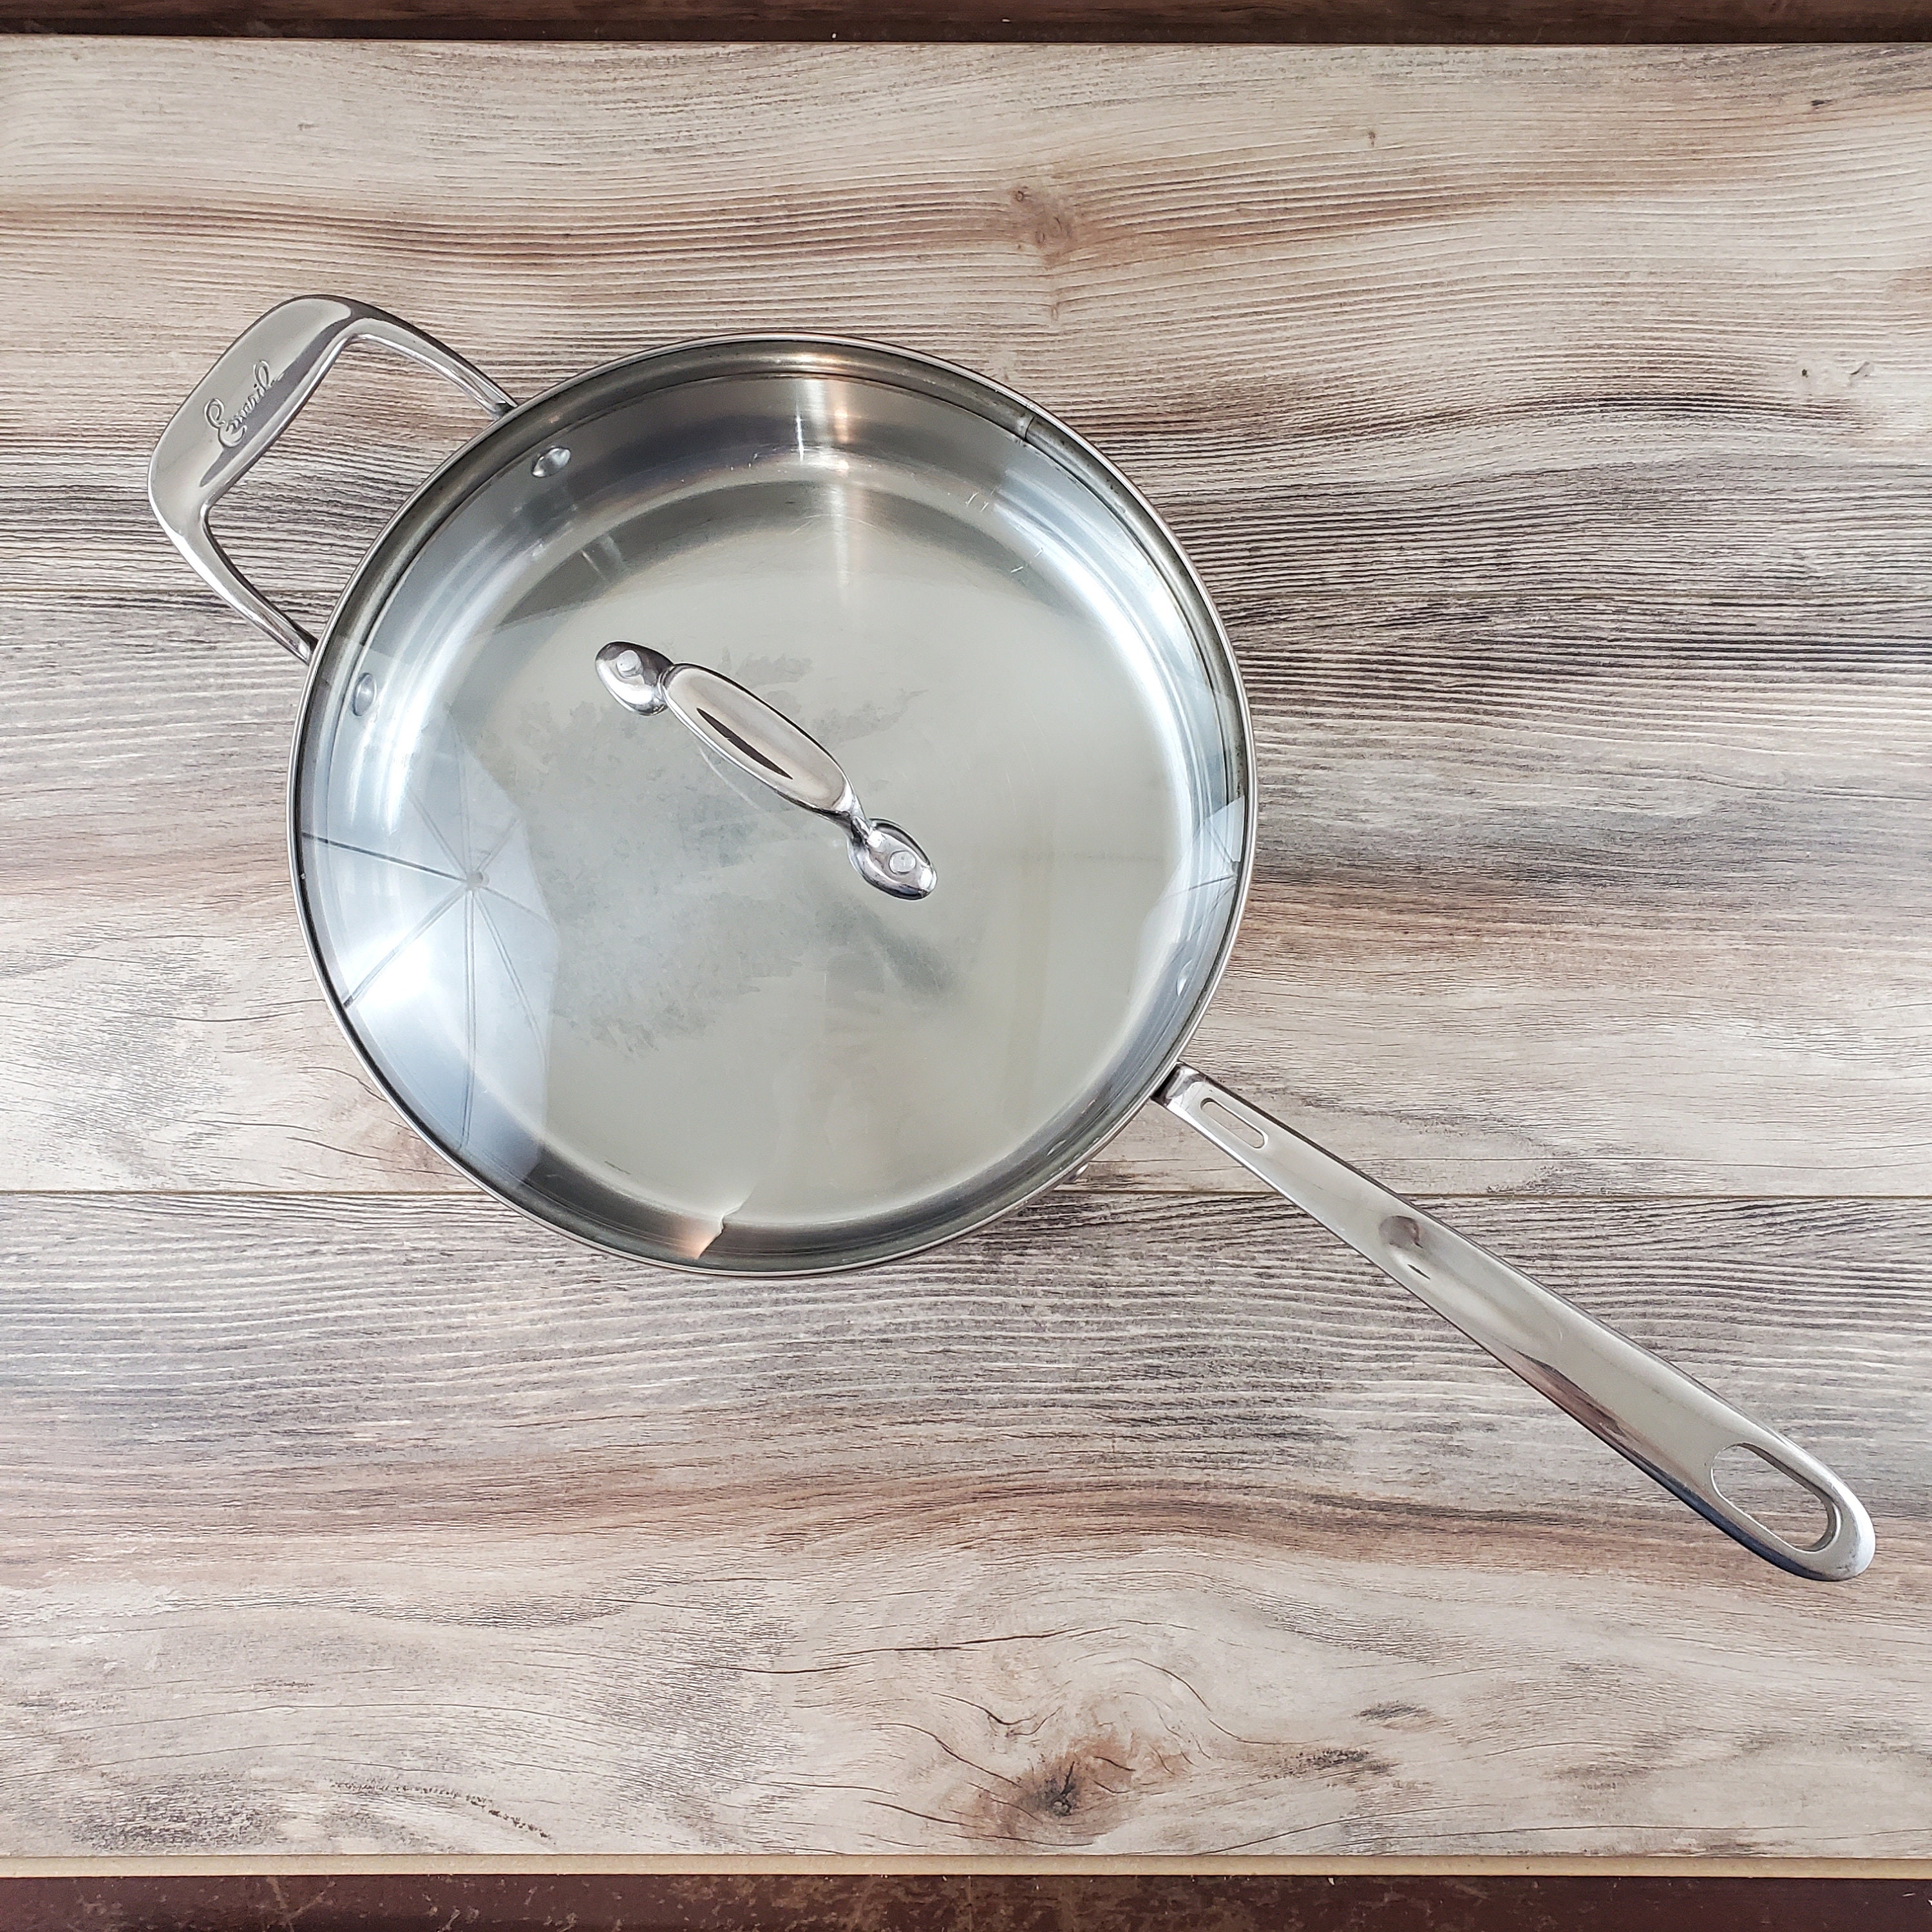 Farberware 8.5 Skillet With Lid / Vintage Stainless Steel Clad Cookware /  Small Frying Pan / MCM Retro Kitchen Wedding Gift 